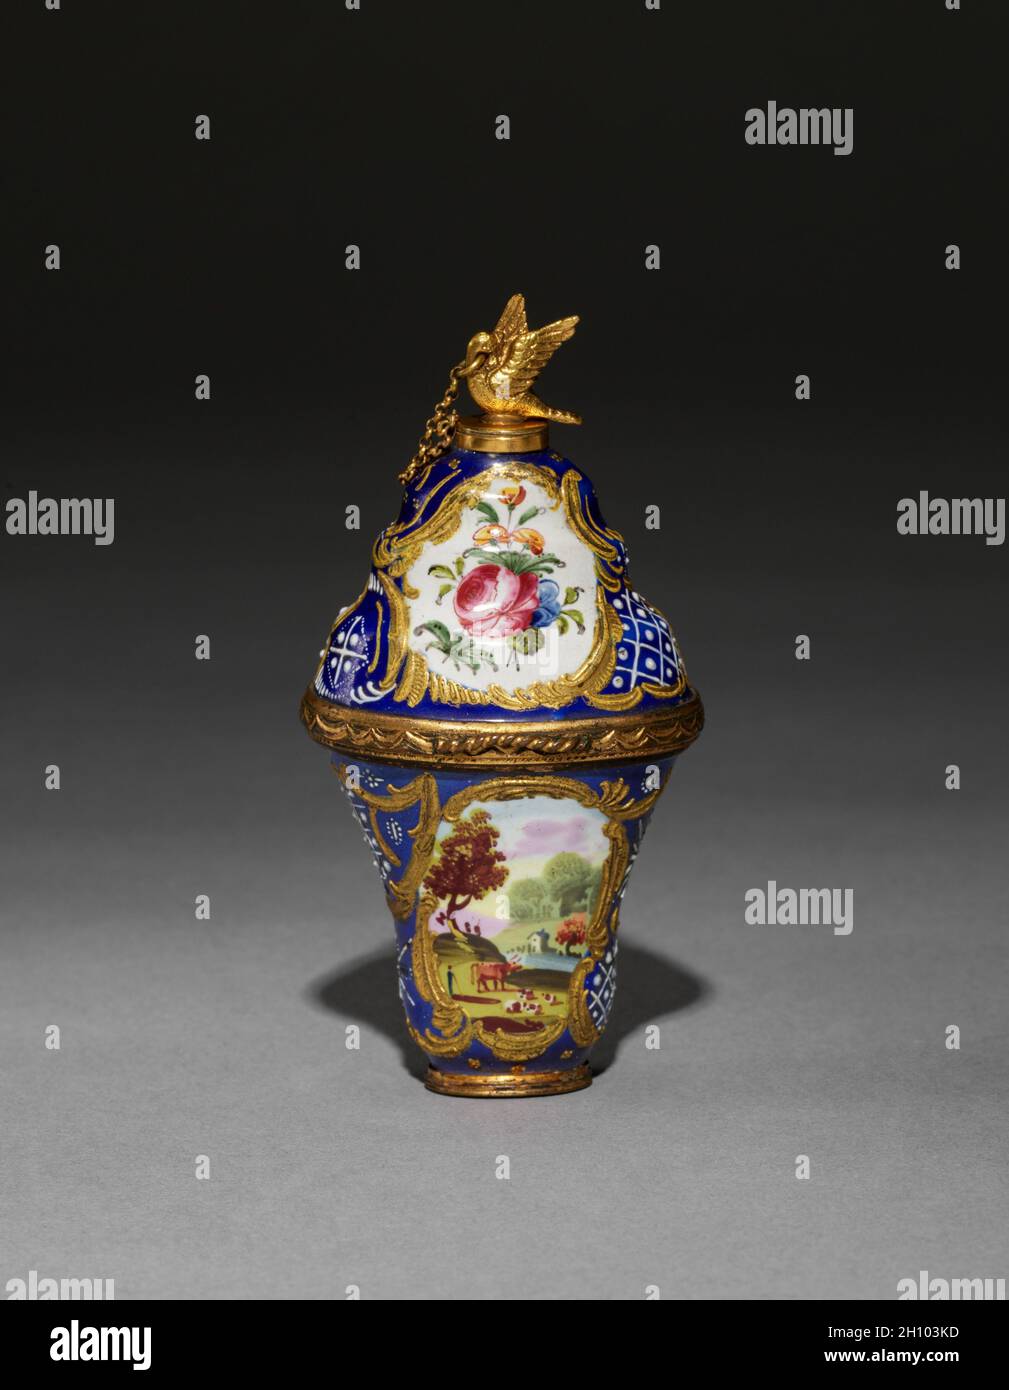 Scent Bottle and Box, 1750-1775. Staffordshire Factory (British). Enamel on copper with metal mounts; overall: 9.3 x 4.8 cm (3 11/16 x 1 7/8 in.). Stock Photo